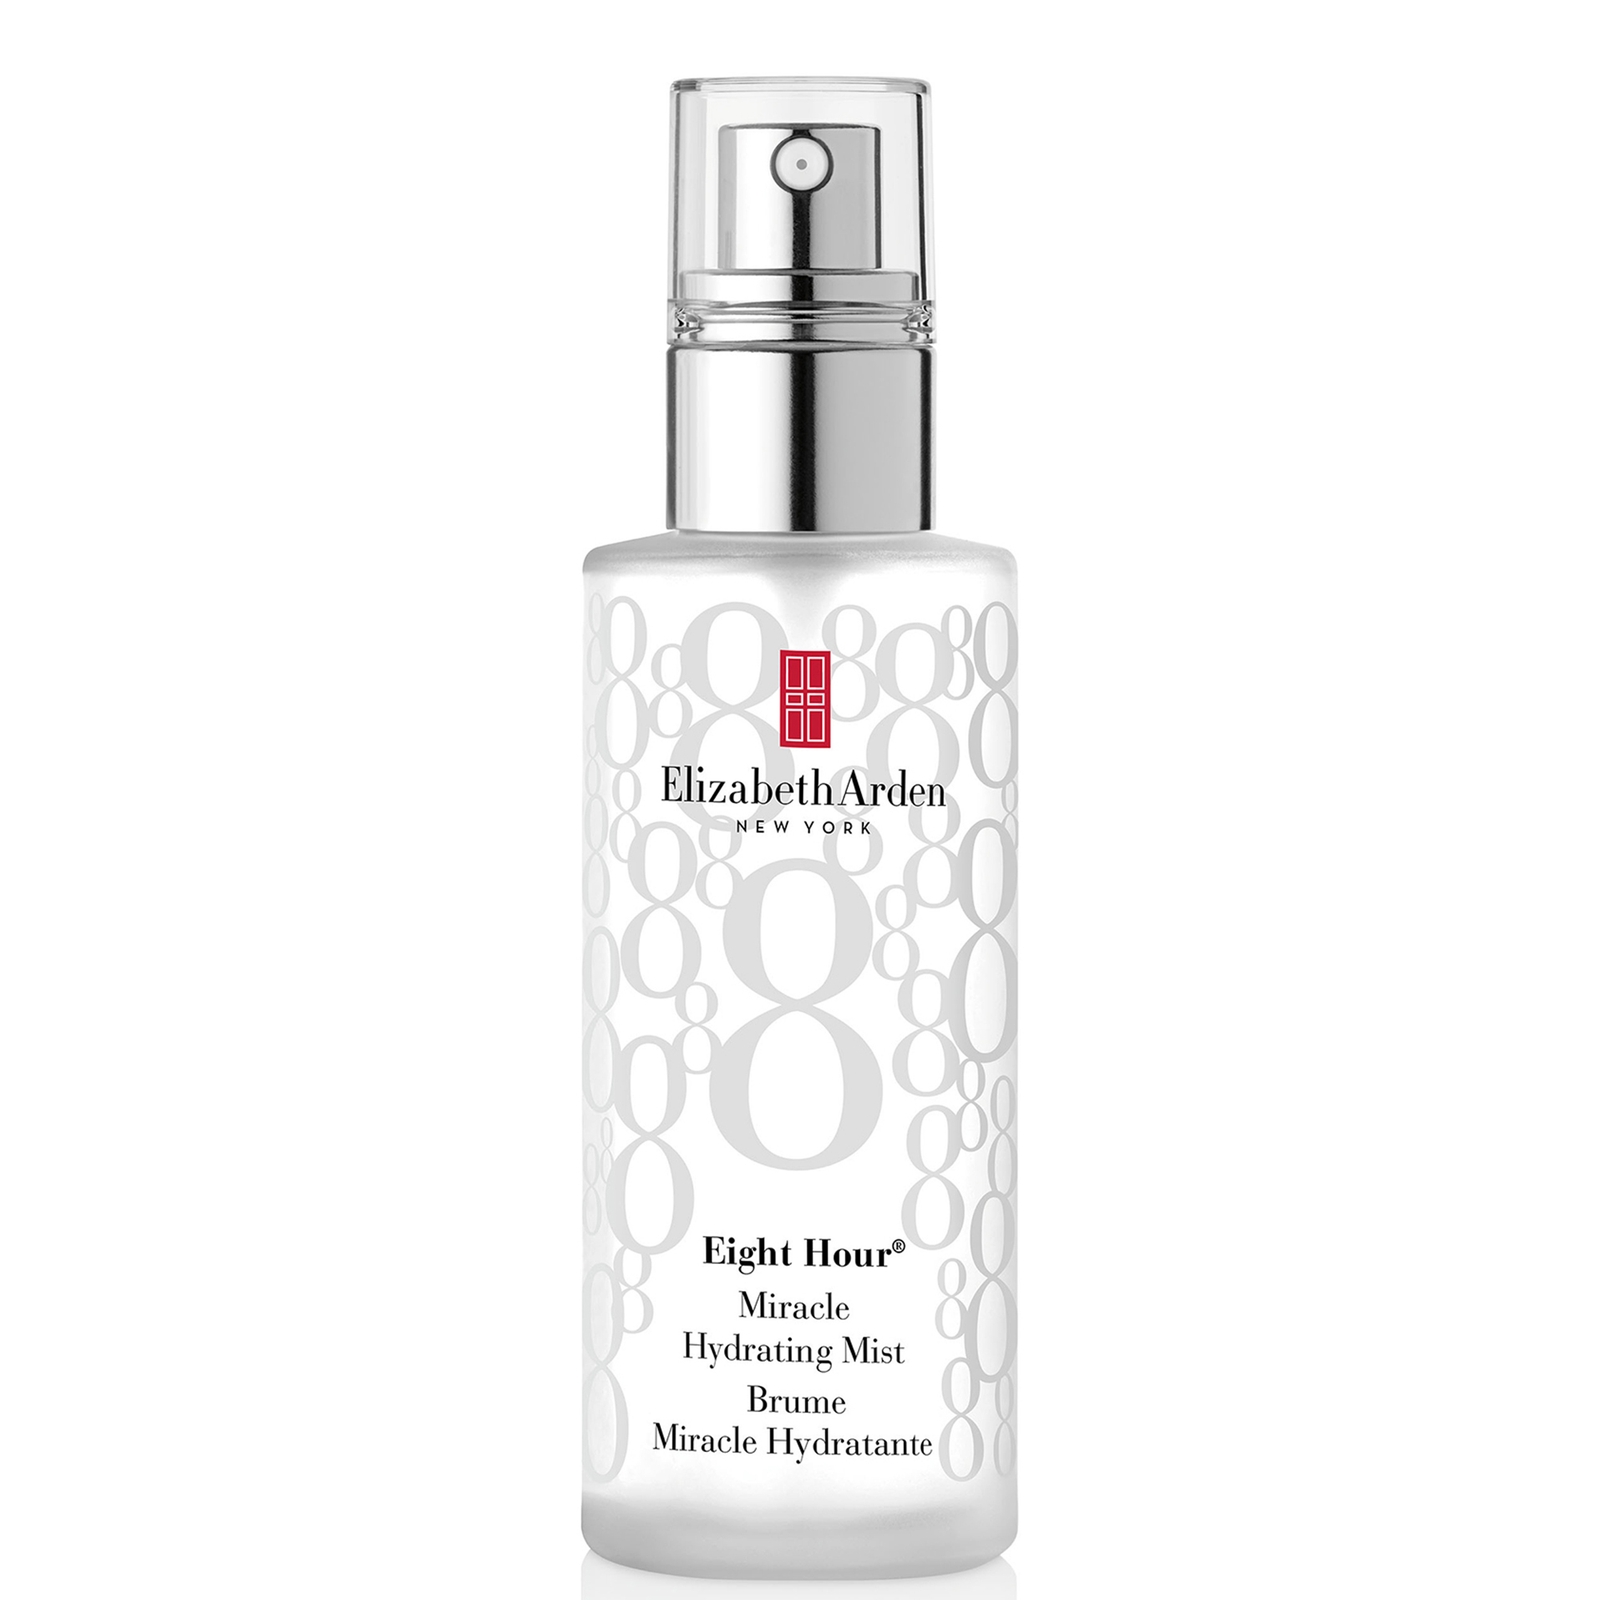 Image of Elizabeth Arden Eight Hour Miracle Hydrating Mist 100ml